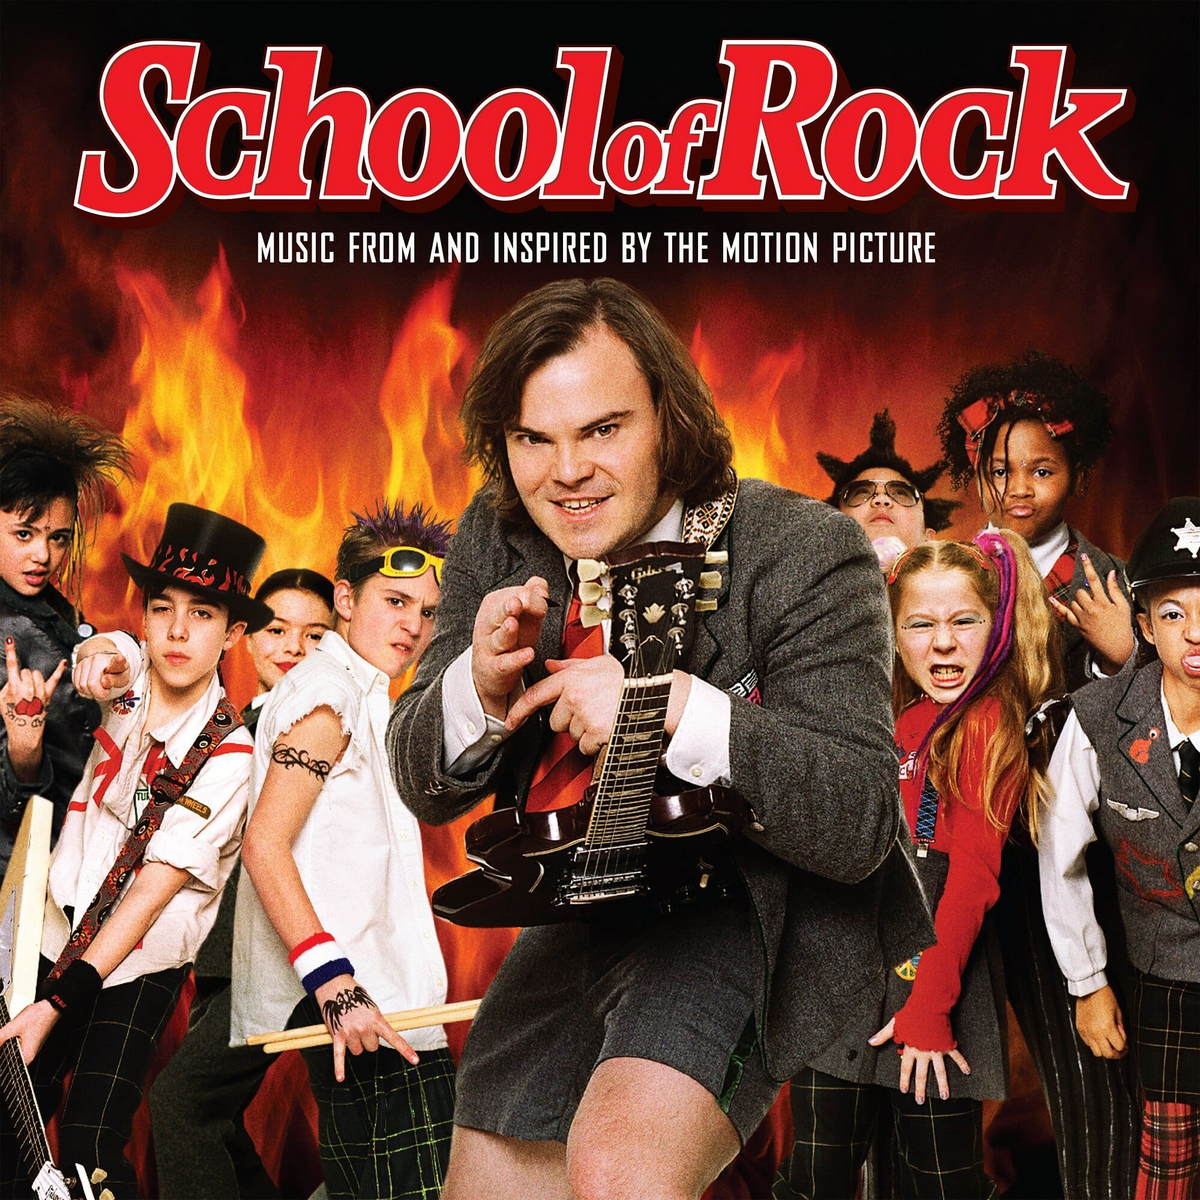 Саундтрек WM School of Rock (Music From And Inspired By The Motion Picture) (Rocktober 2021/Limited/Orange Vinyl) motion modified car front light headlamp led headlight for 10th 2016 2017 2018 2019 2020 2021